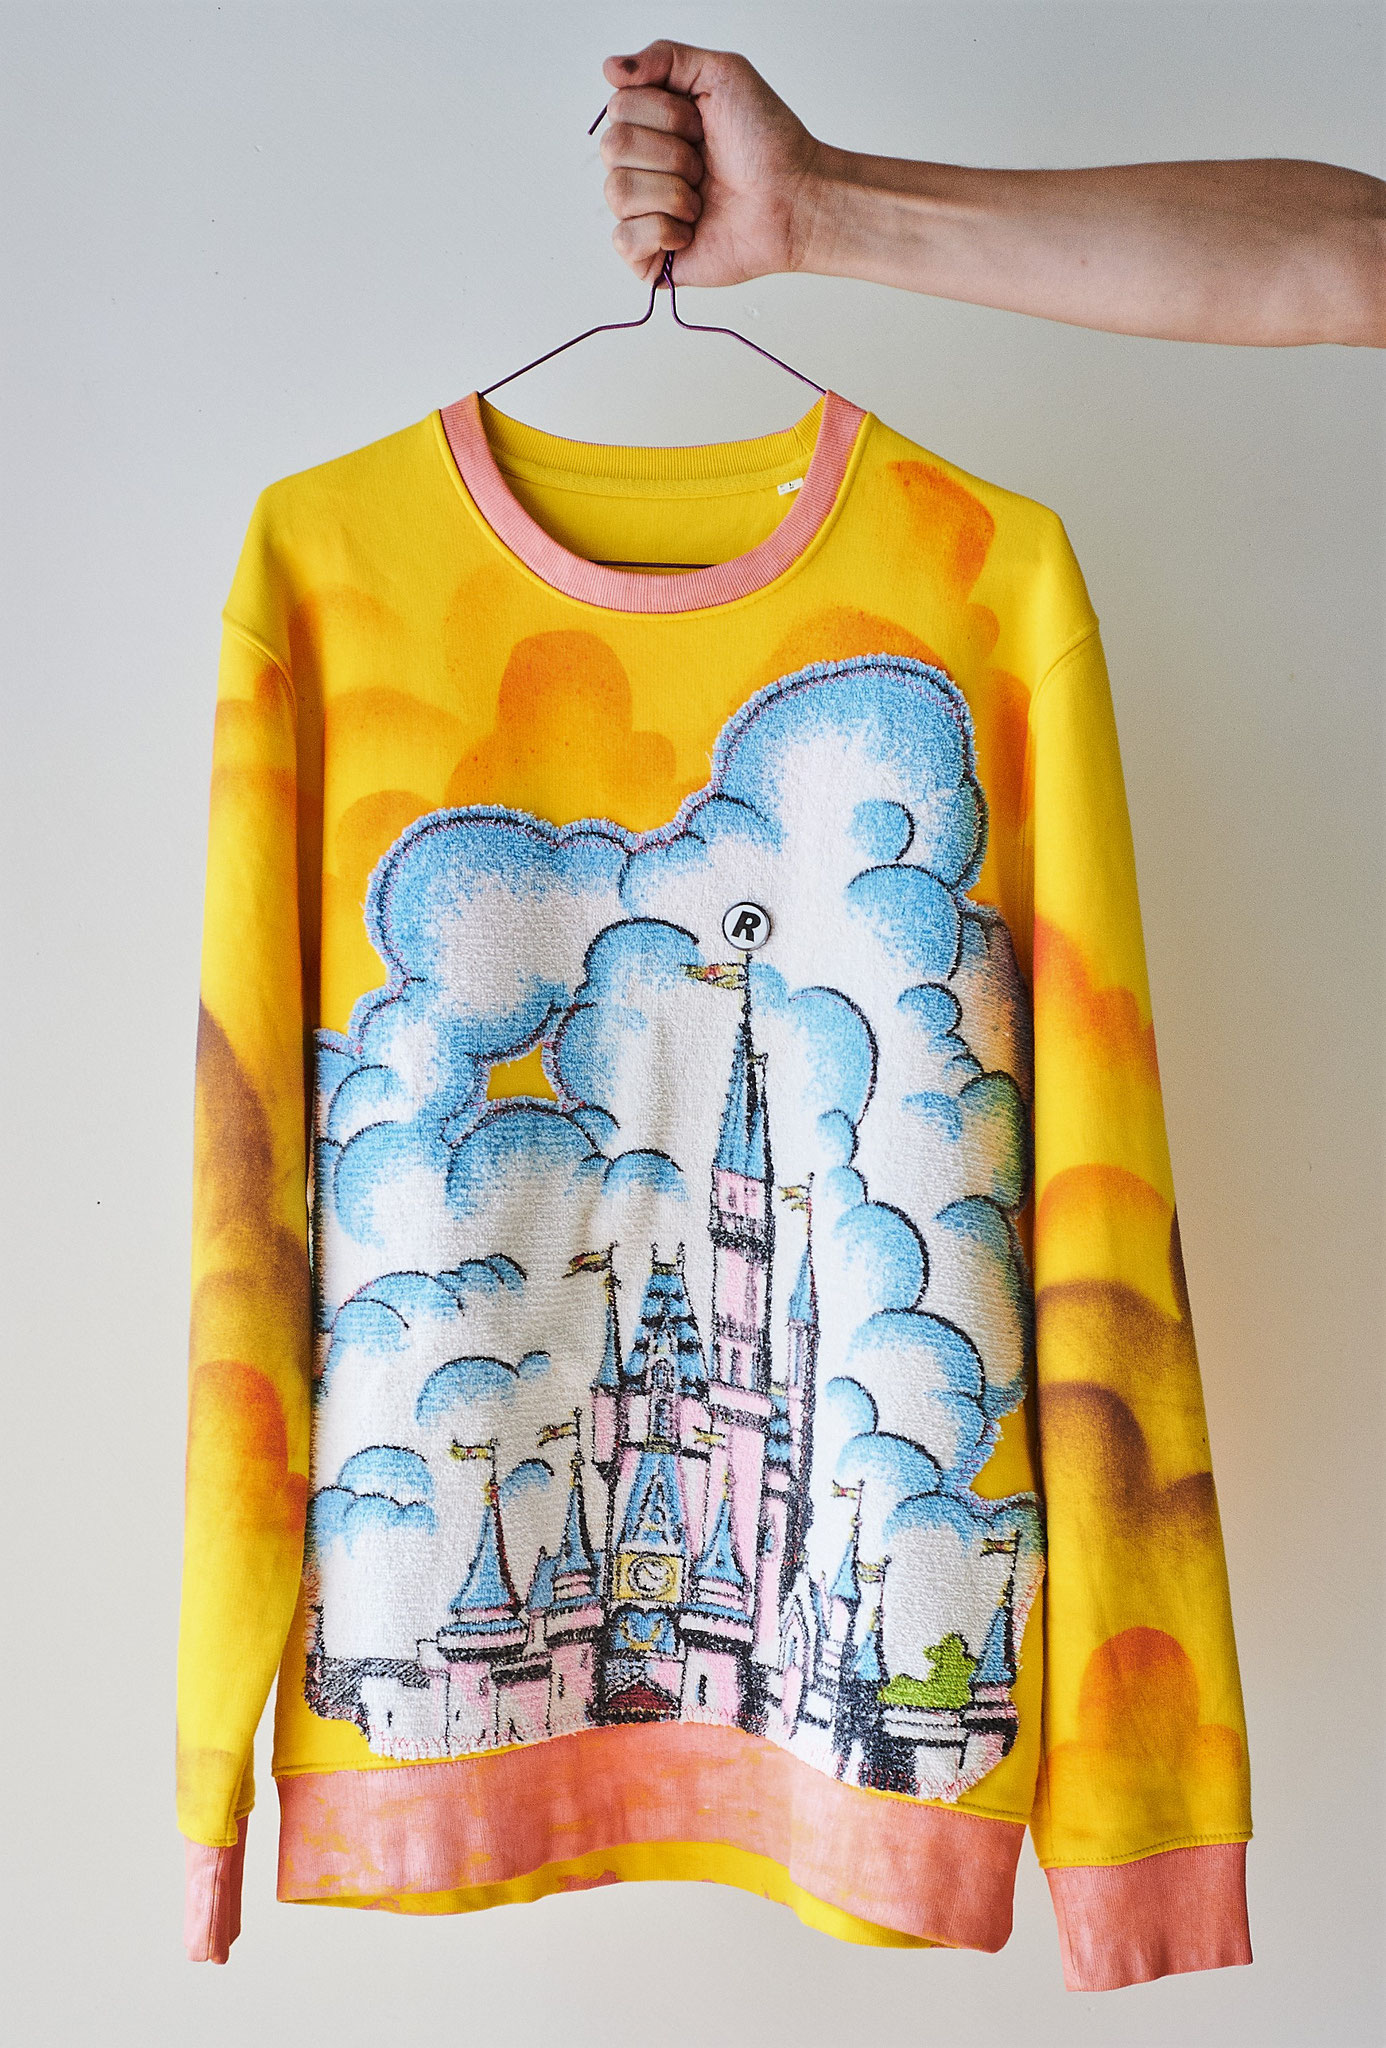 Yellow Cloud Castle, Sweater Froteetuch, Acryl, Pin, Thermofolie, Pin, Größe L, 2021